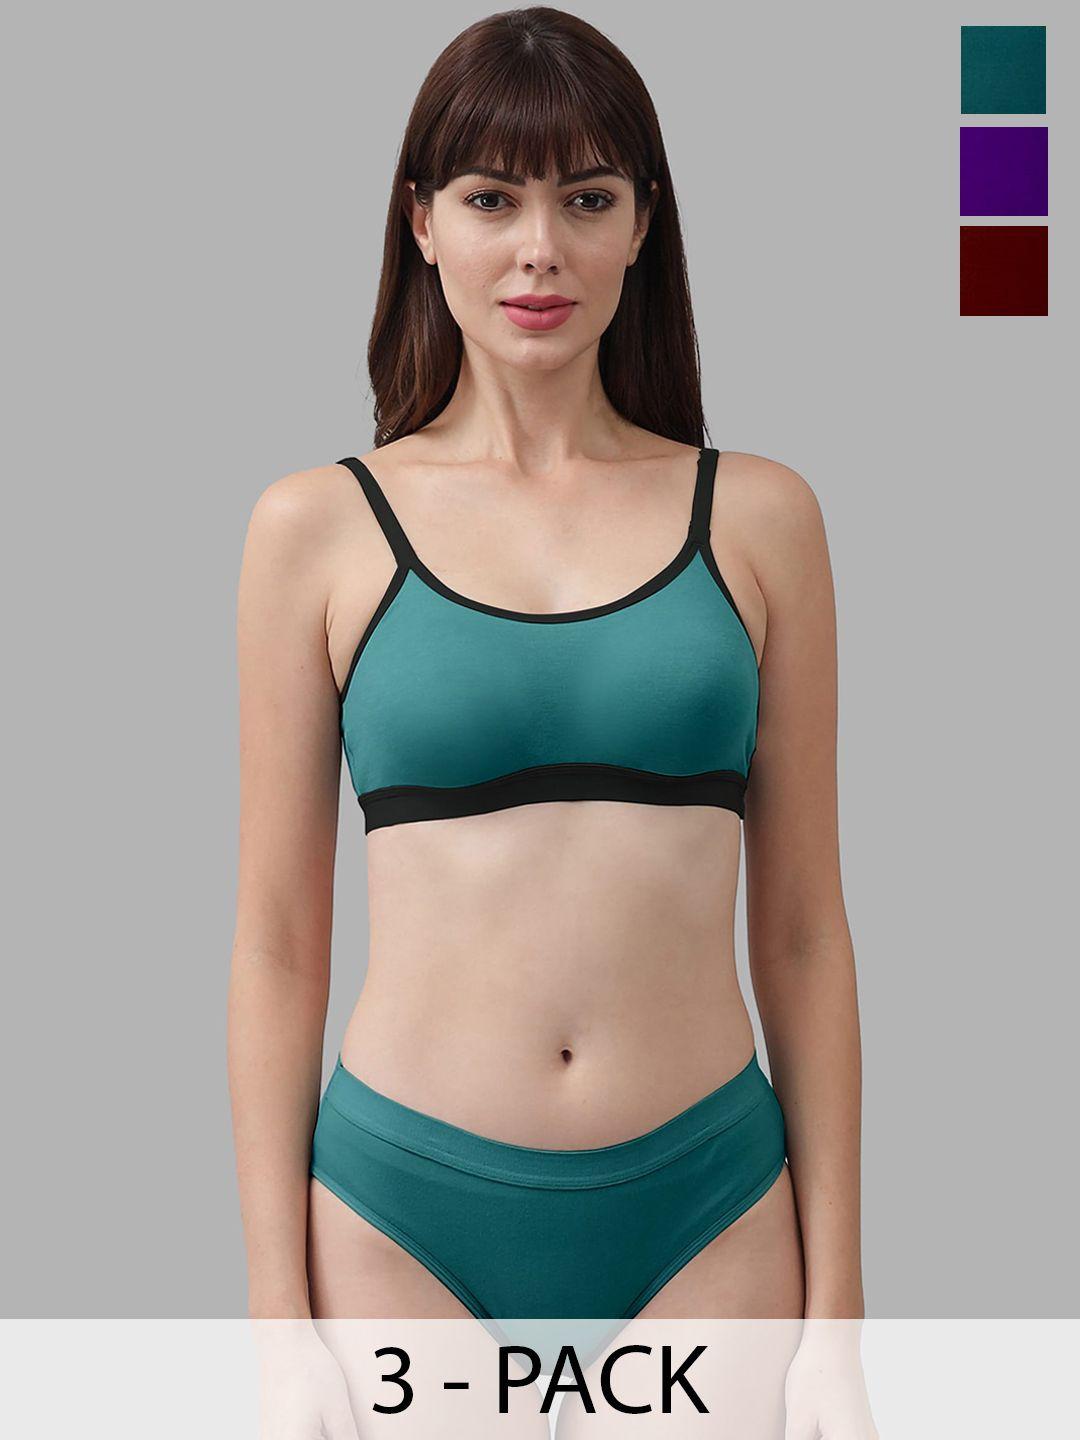 in-curve pack of 3 cotton lingerie set ea_cnora set_green,purple,maroon